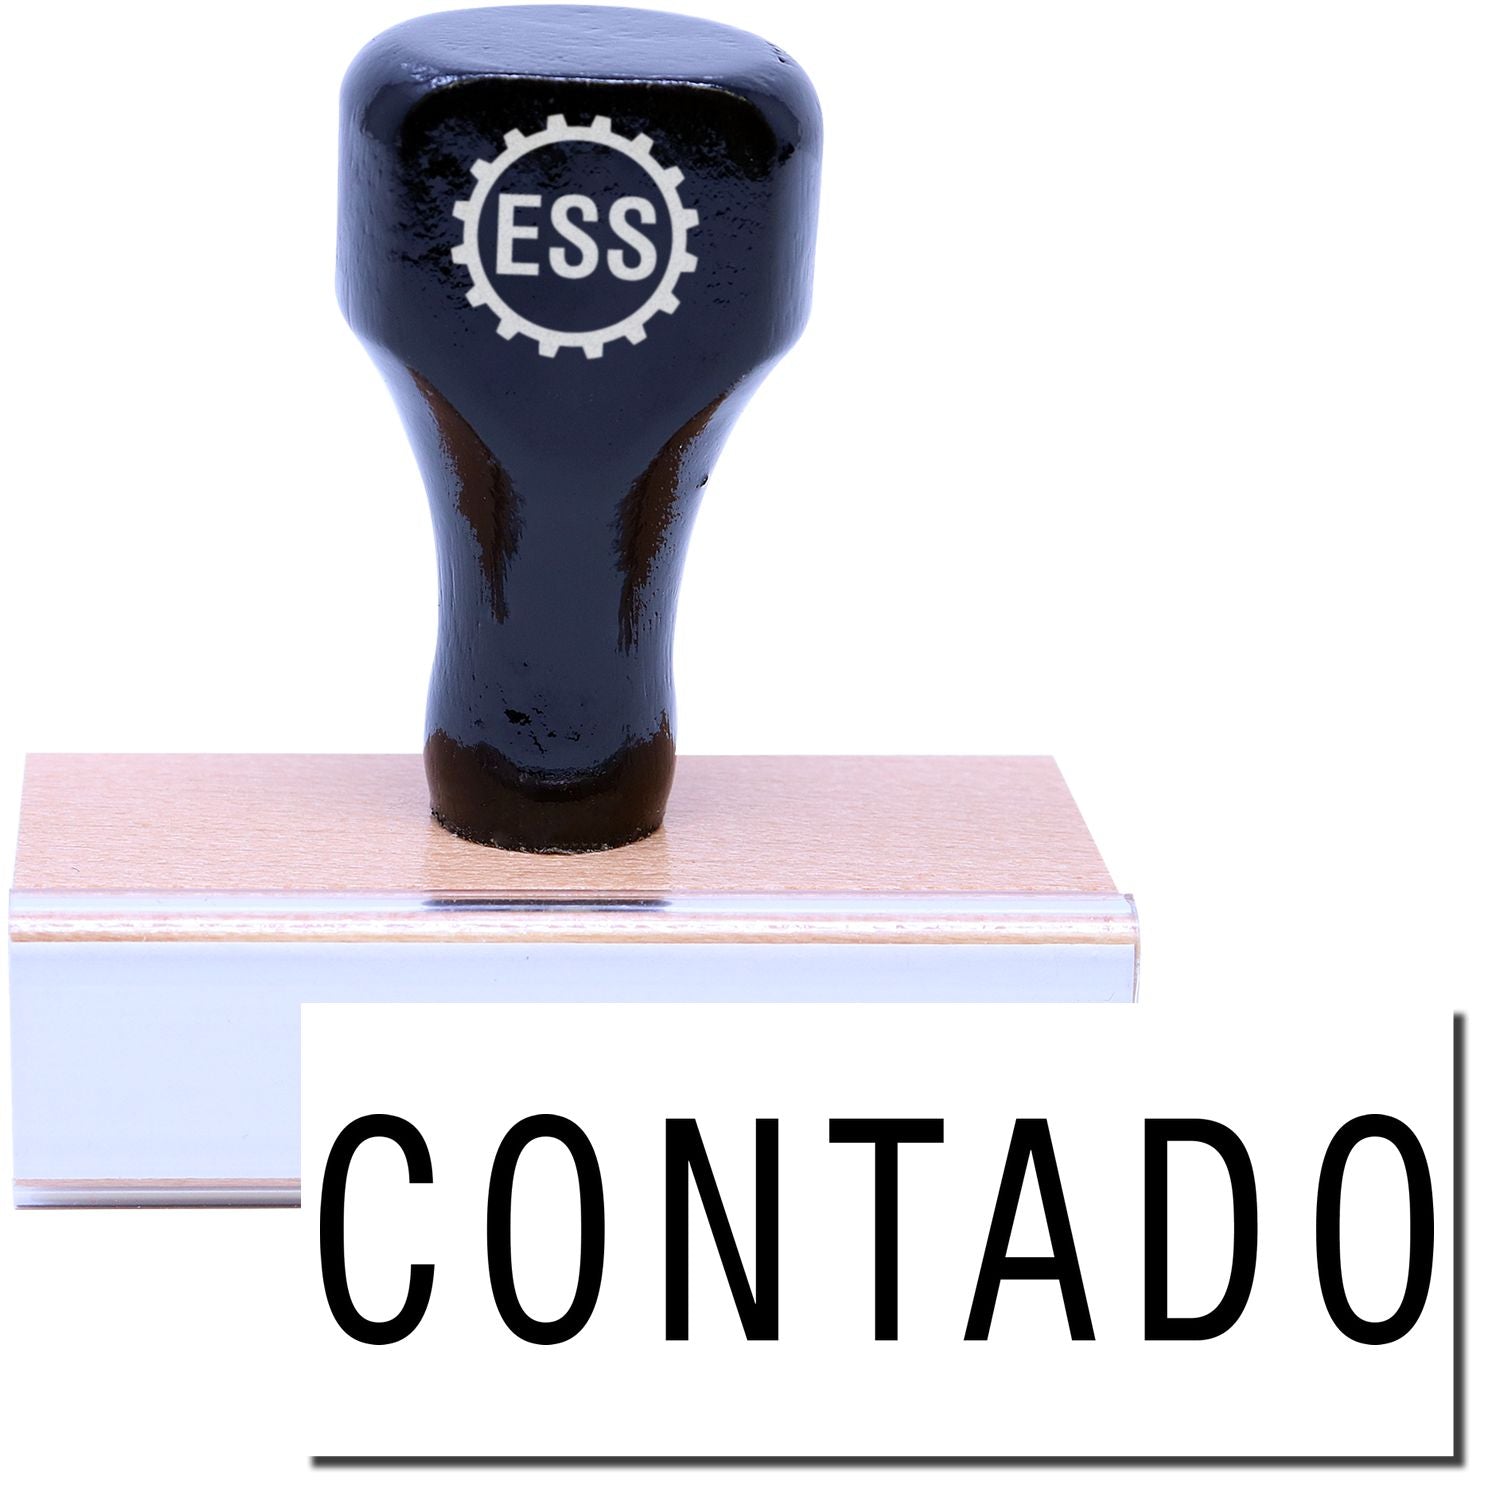 A stock office rubber stamp with a stamped image showing how the text "CONTADO" is displayed after stamping.